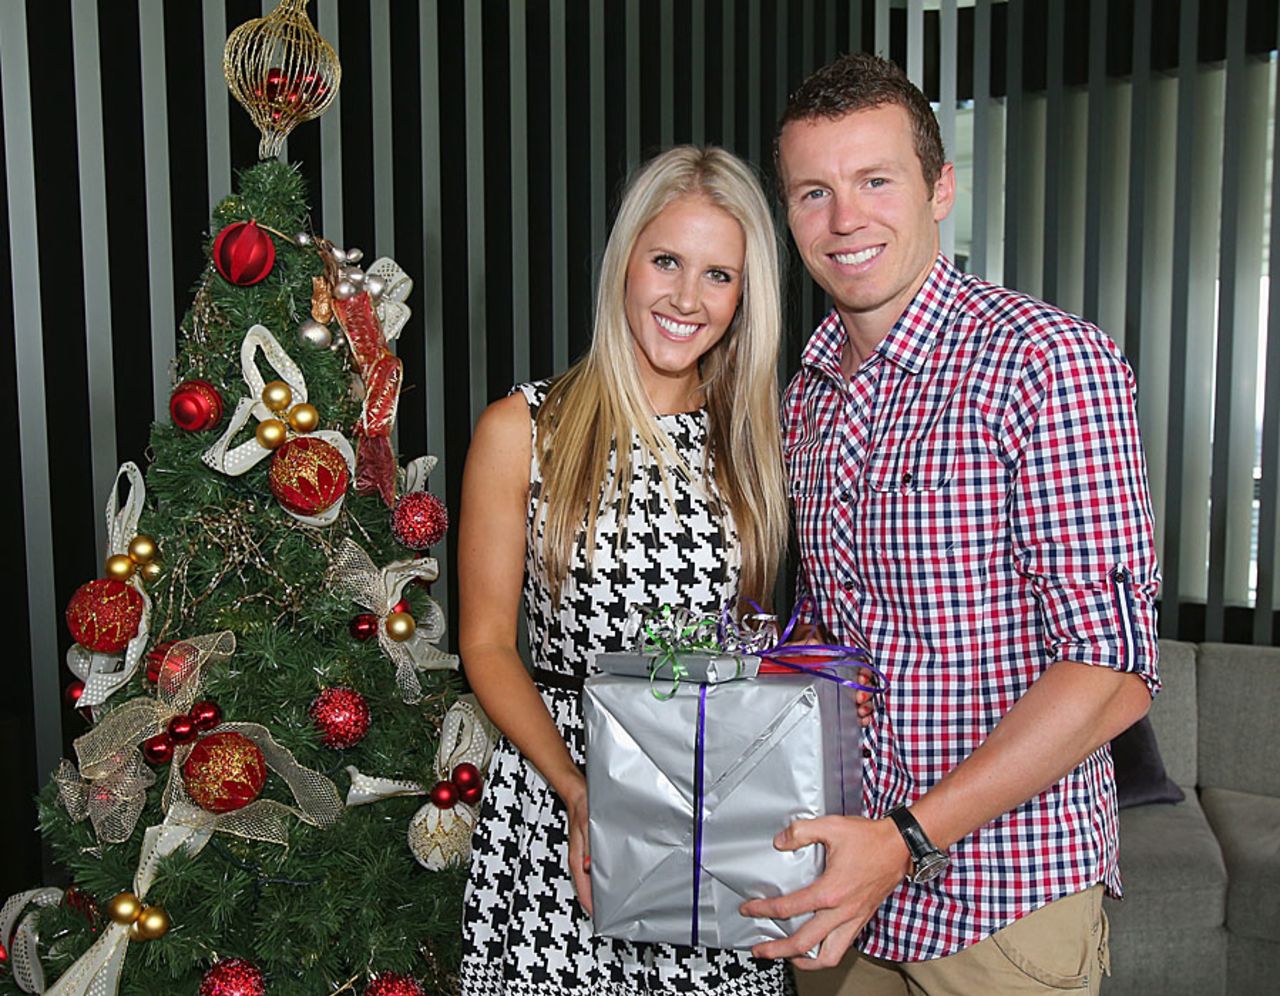 Peter Siddle with his partner, Melbourne, December 25, 2012